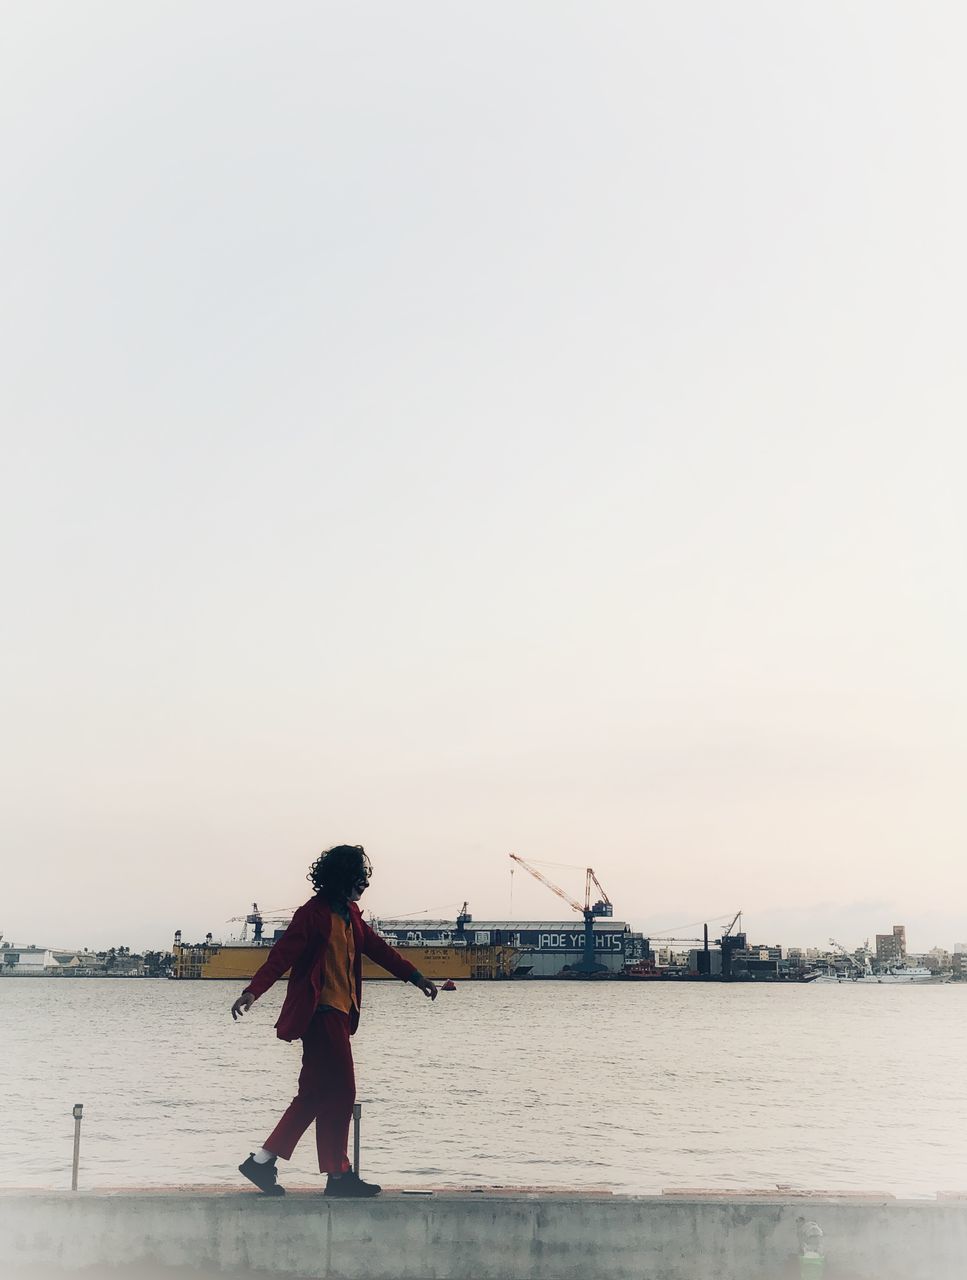 REAR VIEW OF WOMAN STANDING ON SEA SHORE AGAINST CLEAR SKY